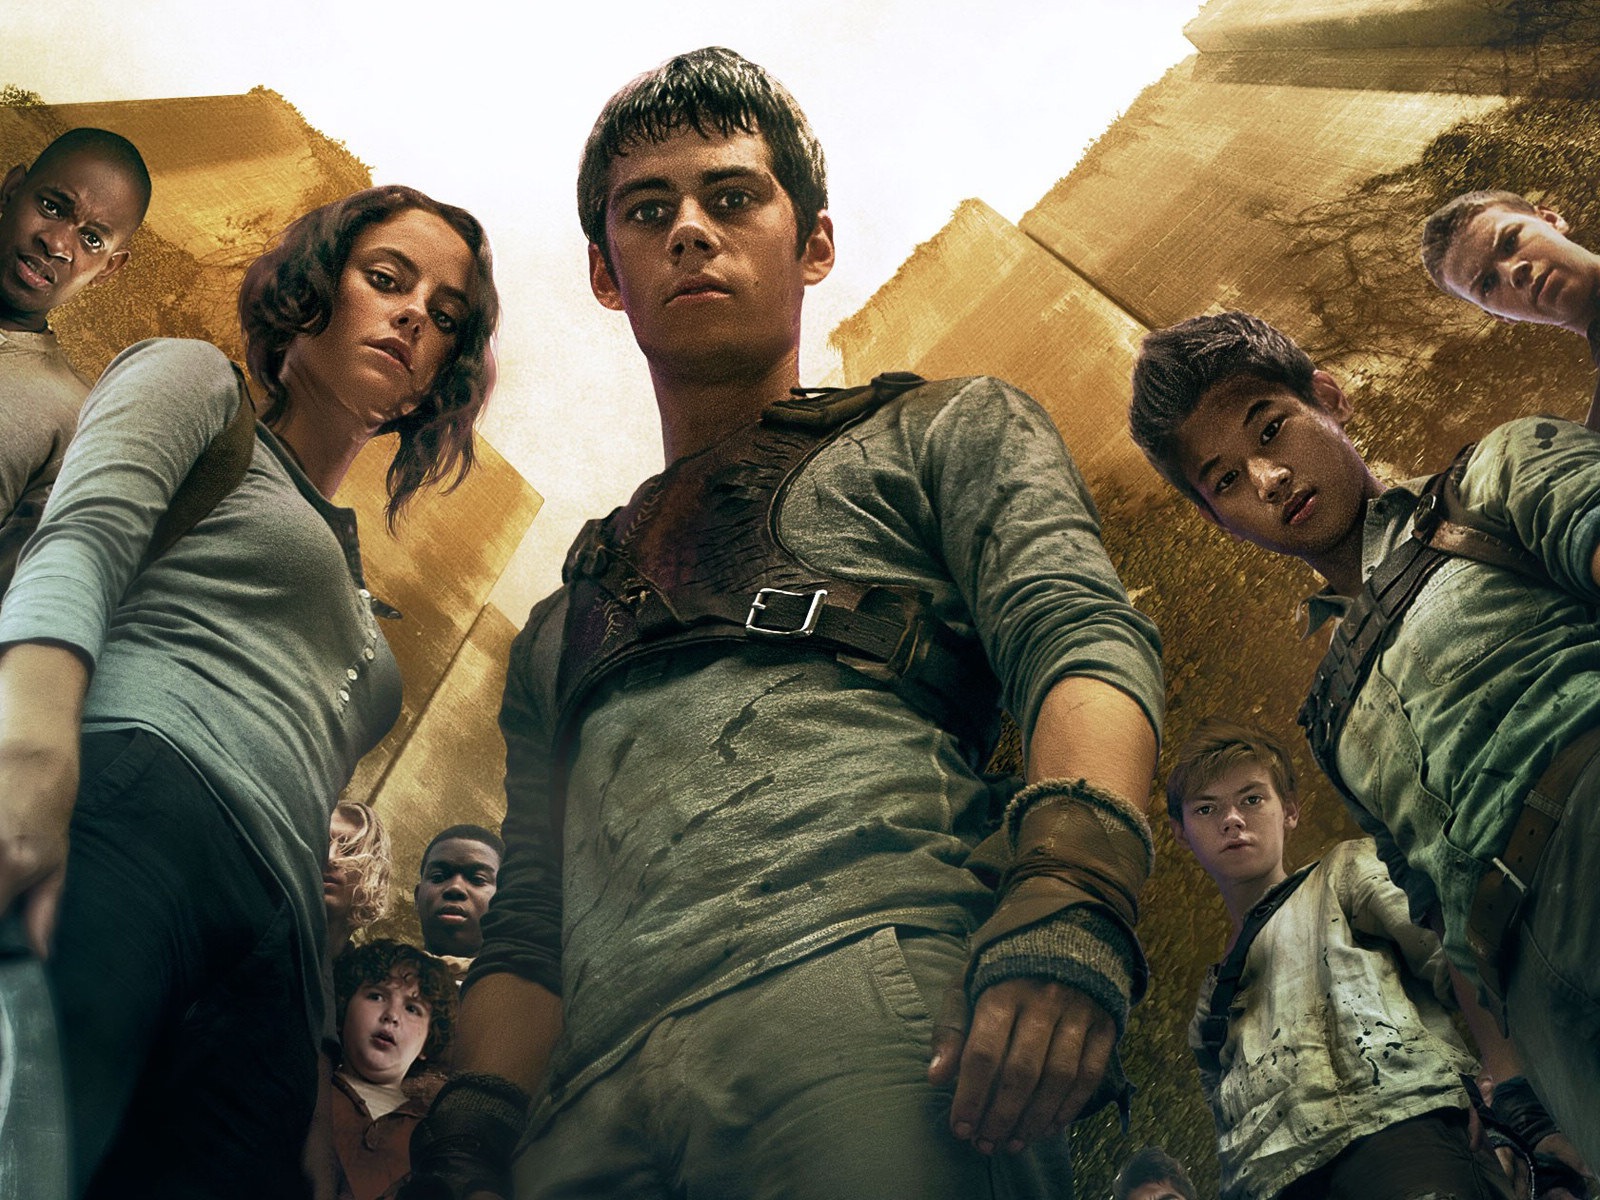 The Maze Runner HD movie wallpapers #3 - 1600x1200